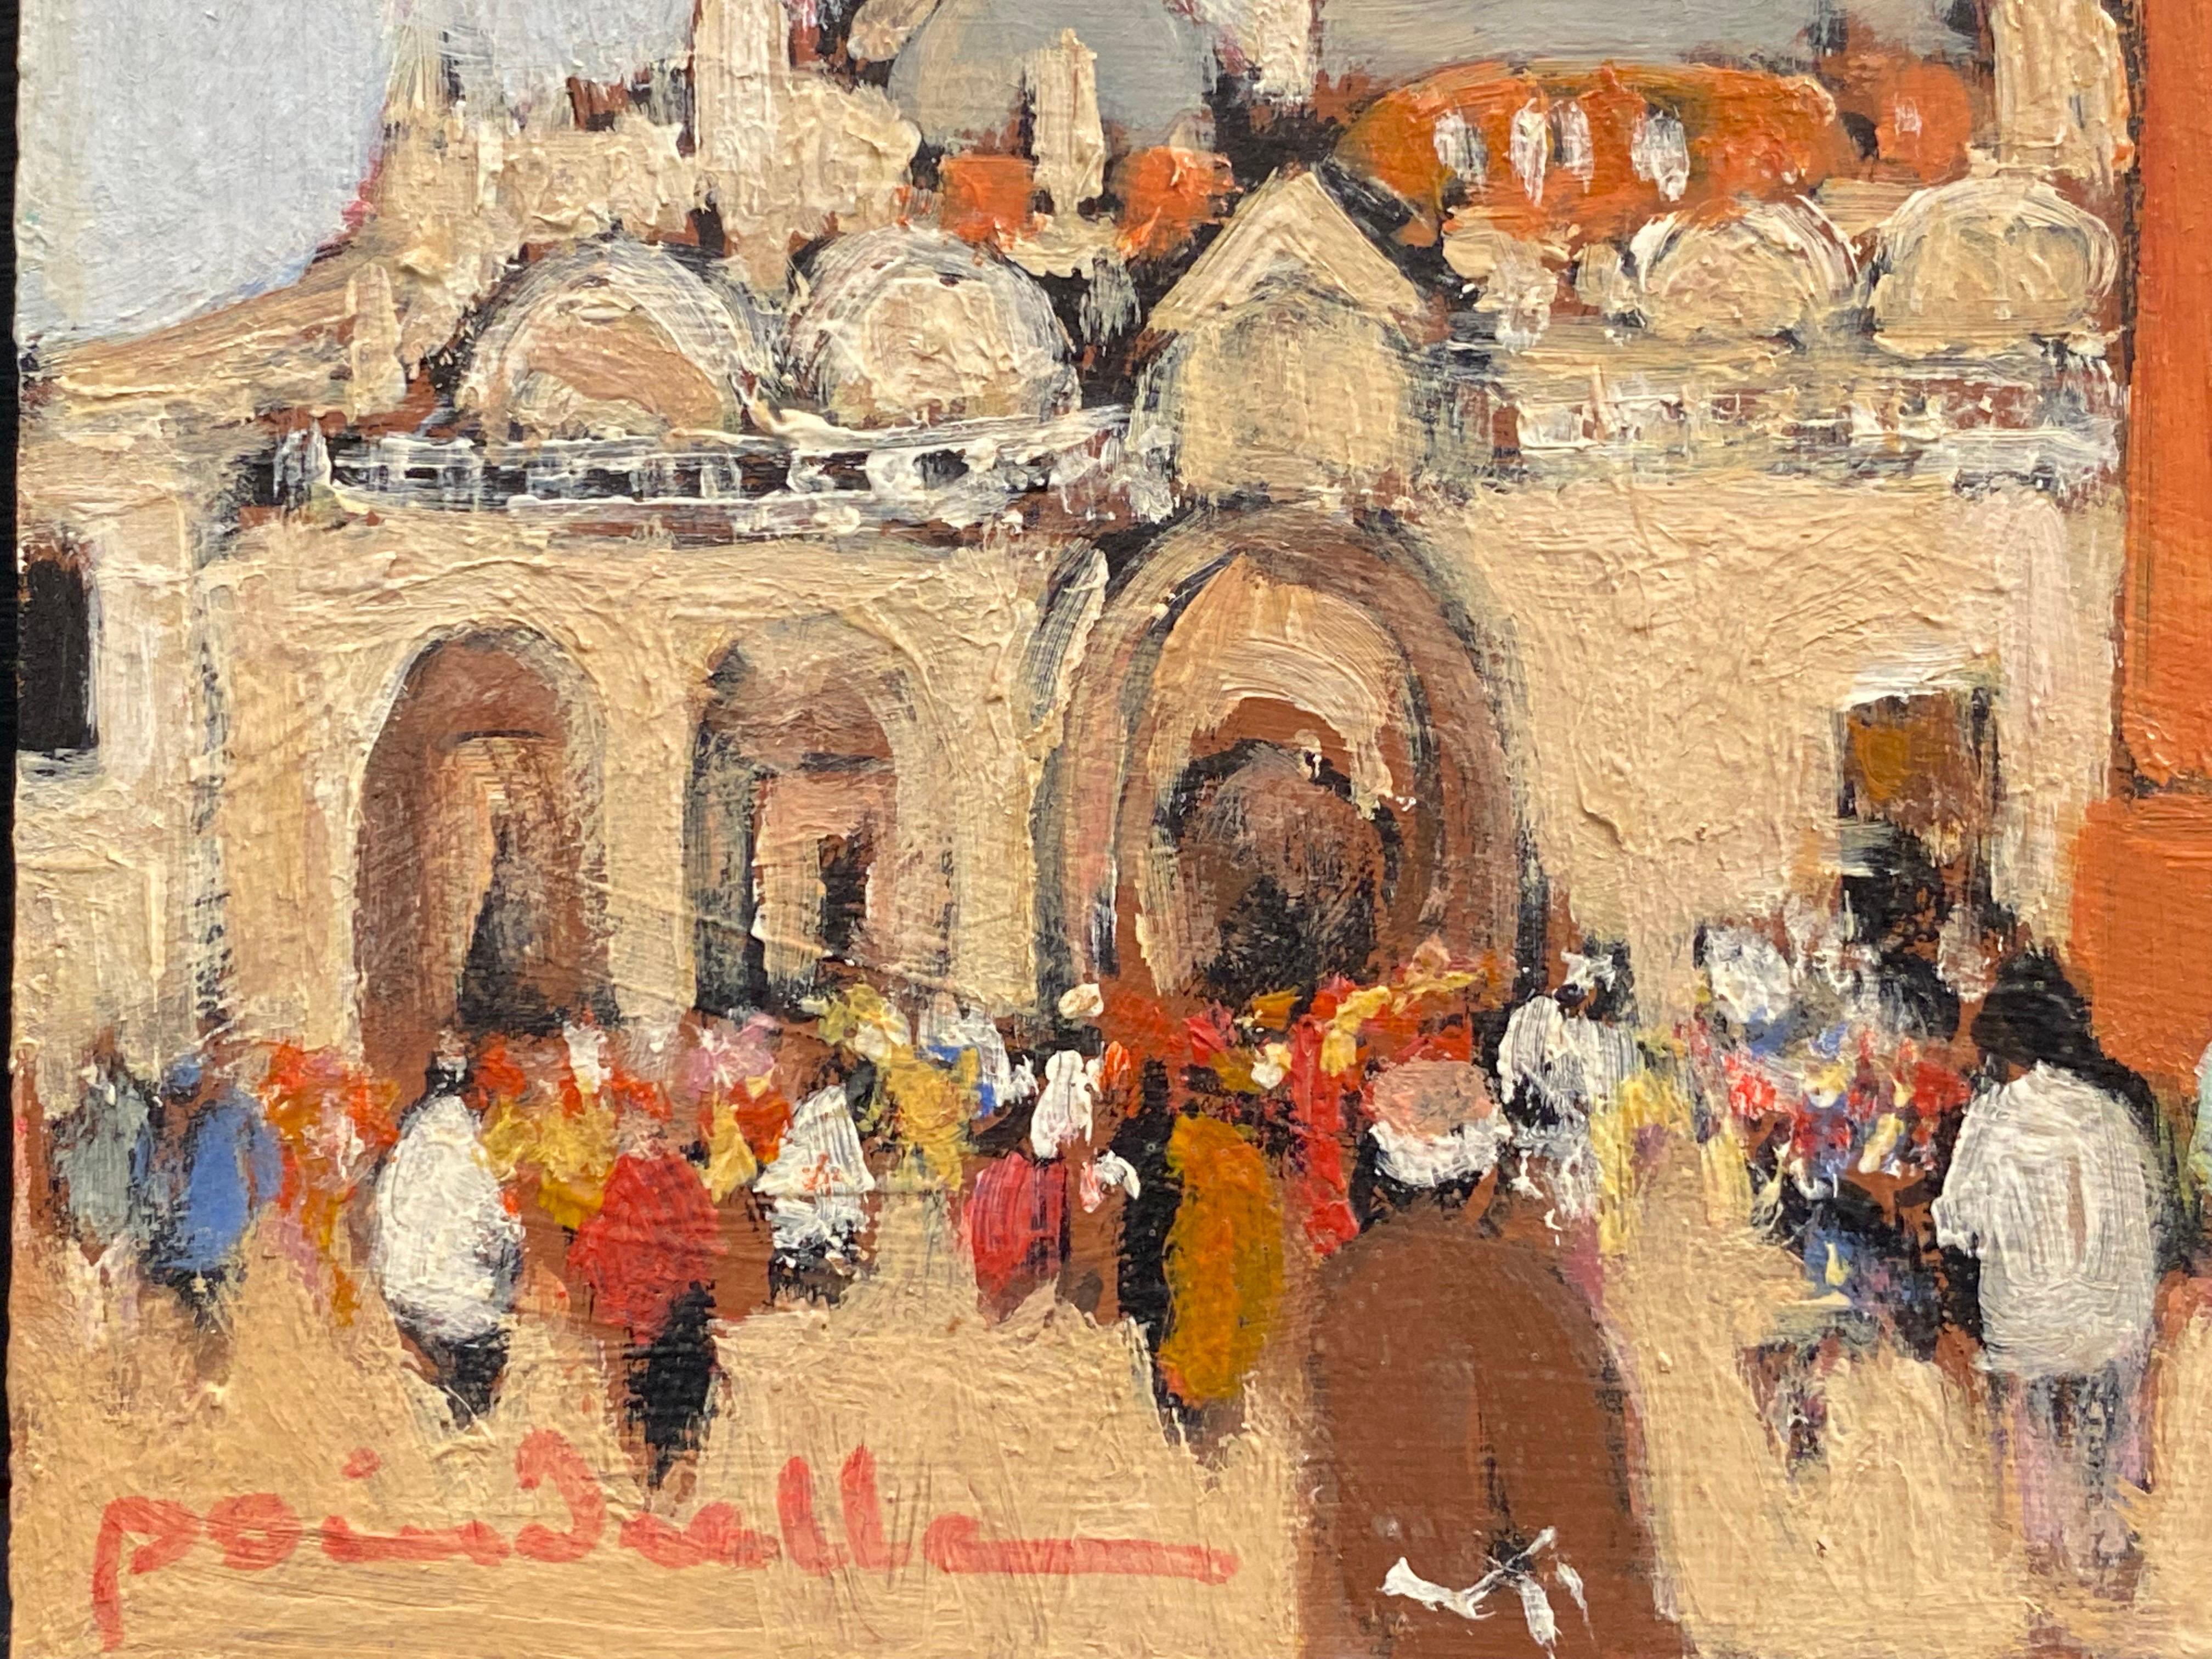 Artist/ School: Patrice Poindrelle (French b. 1954), signed on front and back, inscribed verso

Title: Piazza San Marco, Venice

Medium: oil painting on board, unframed.

Size:  painting: 5.5 x 7 inches     

Provenance: private collection, Paris.